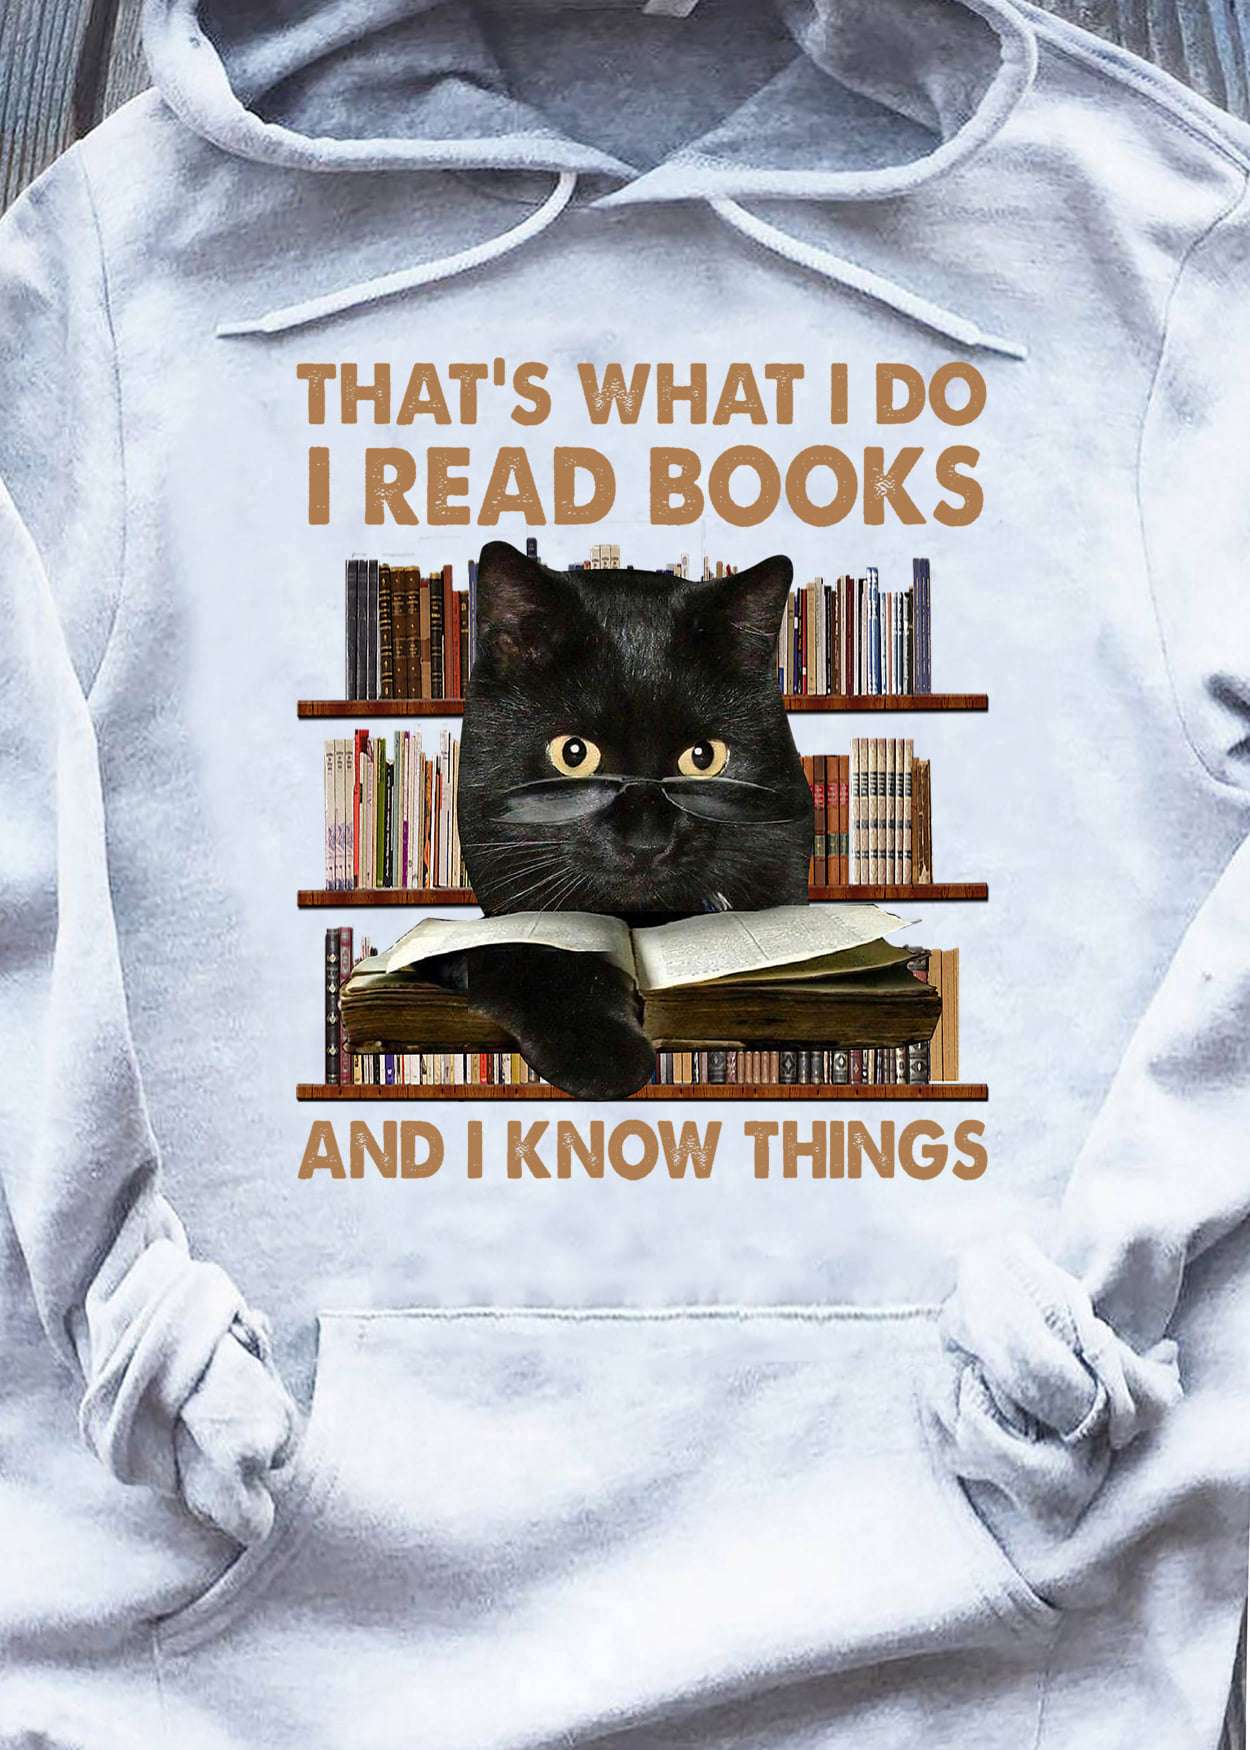 That's what I do I read books and I know things - Black cat and books